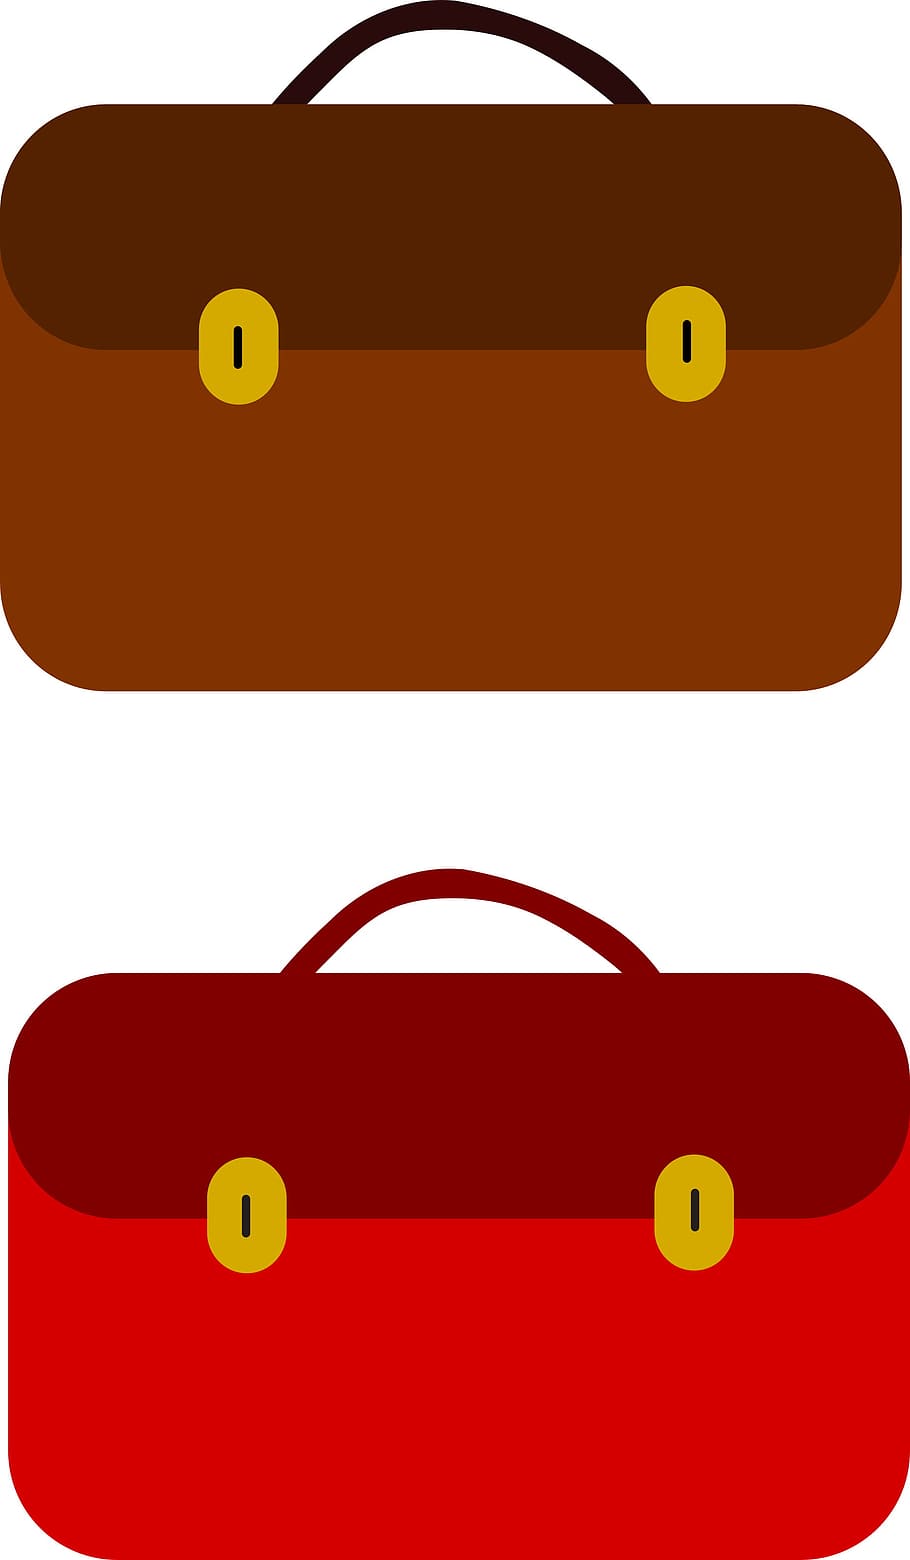 simple, illustration, briefcase, isolated, white, background., choice, brown, red, color scheme